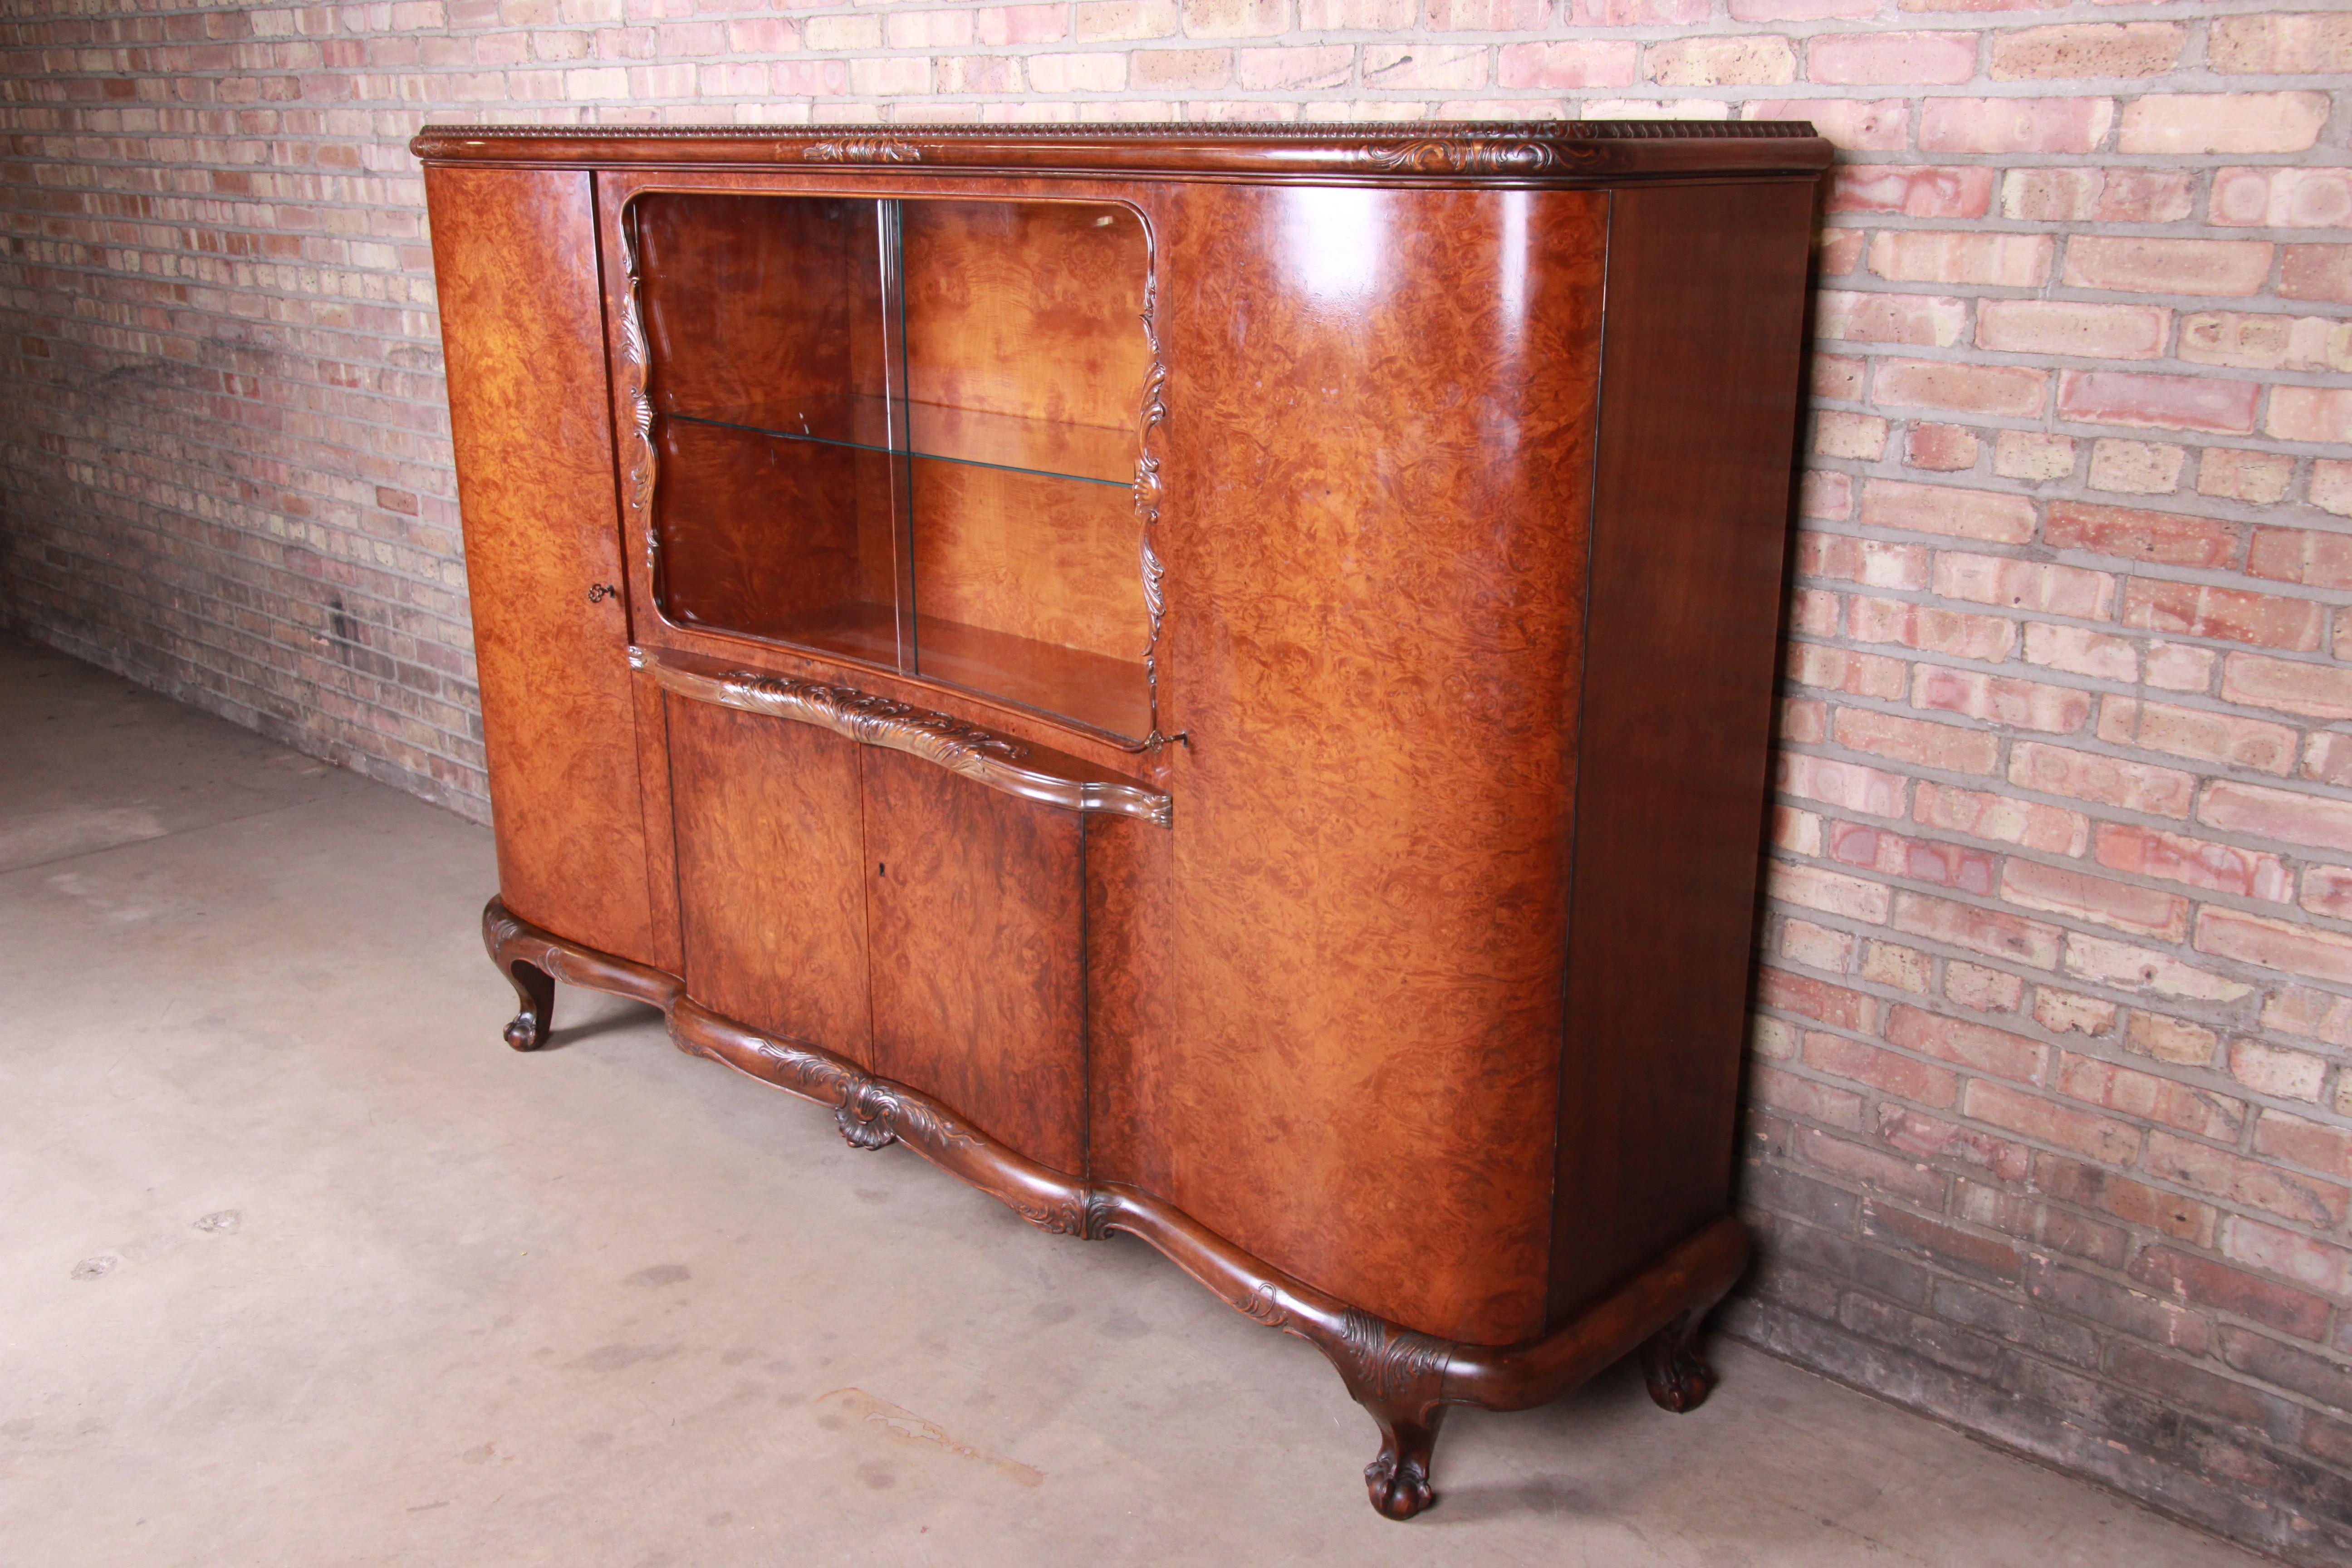 An exceptional French Art Deco burled walnut bar cabinet, sideboard, or bookcase,

circa 1930s

Measures: 89.5